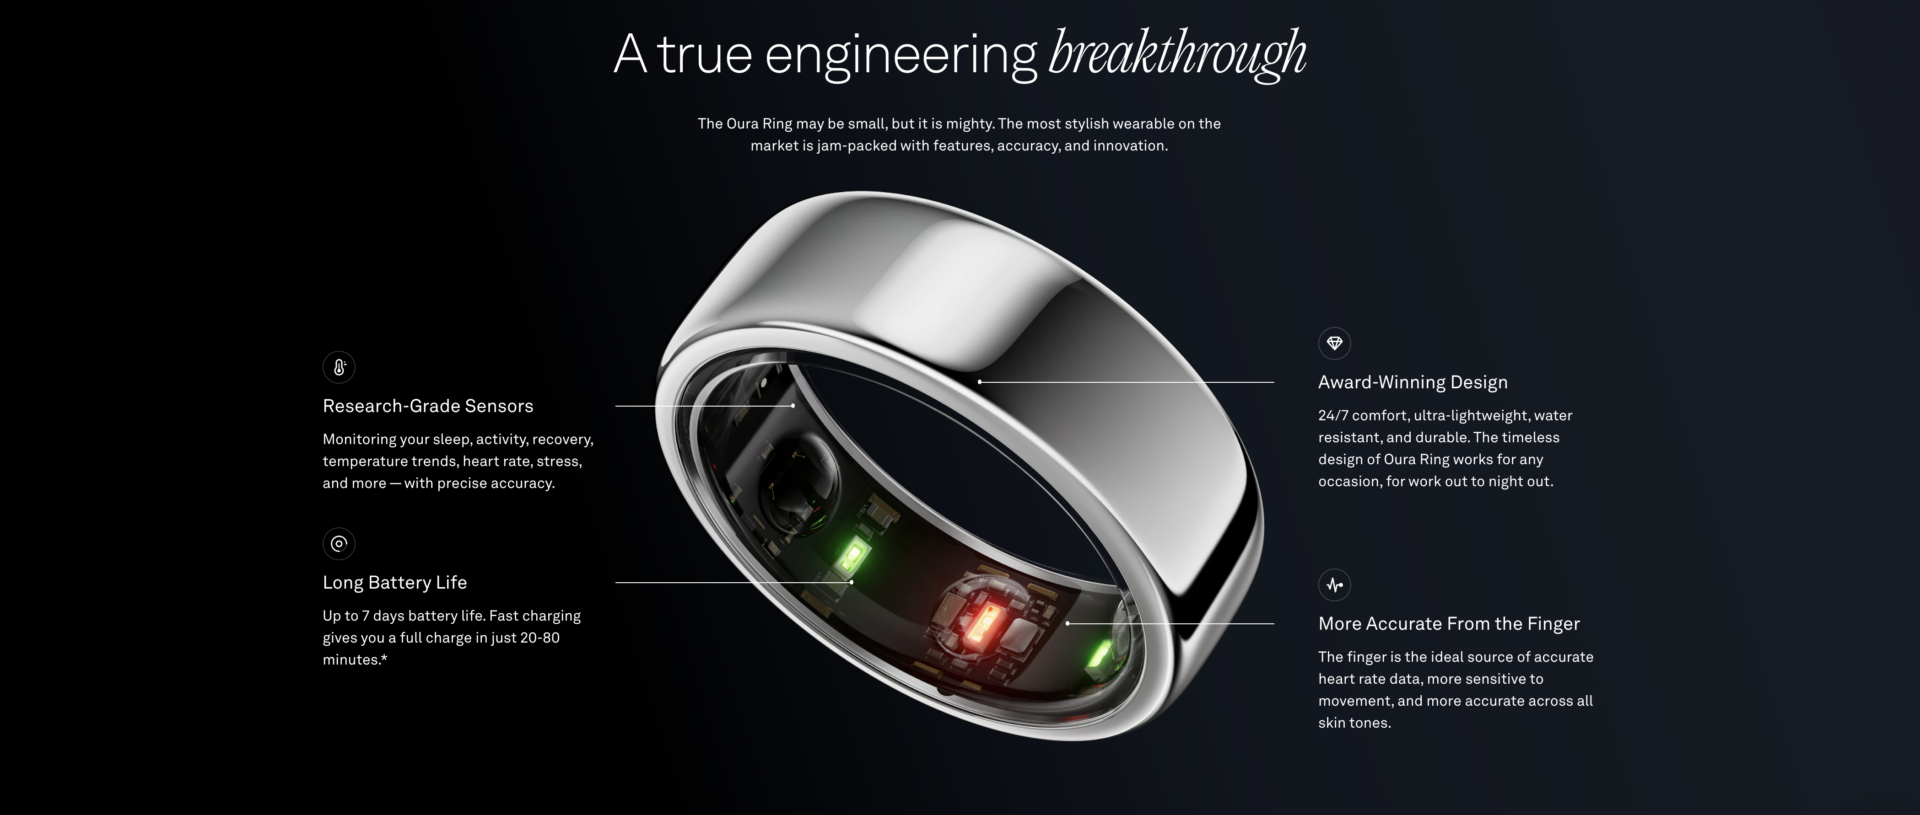 oura ring features